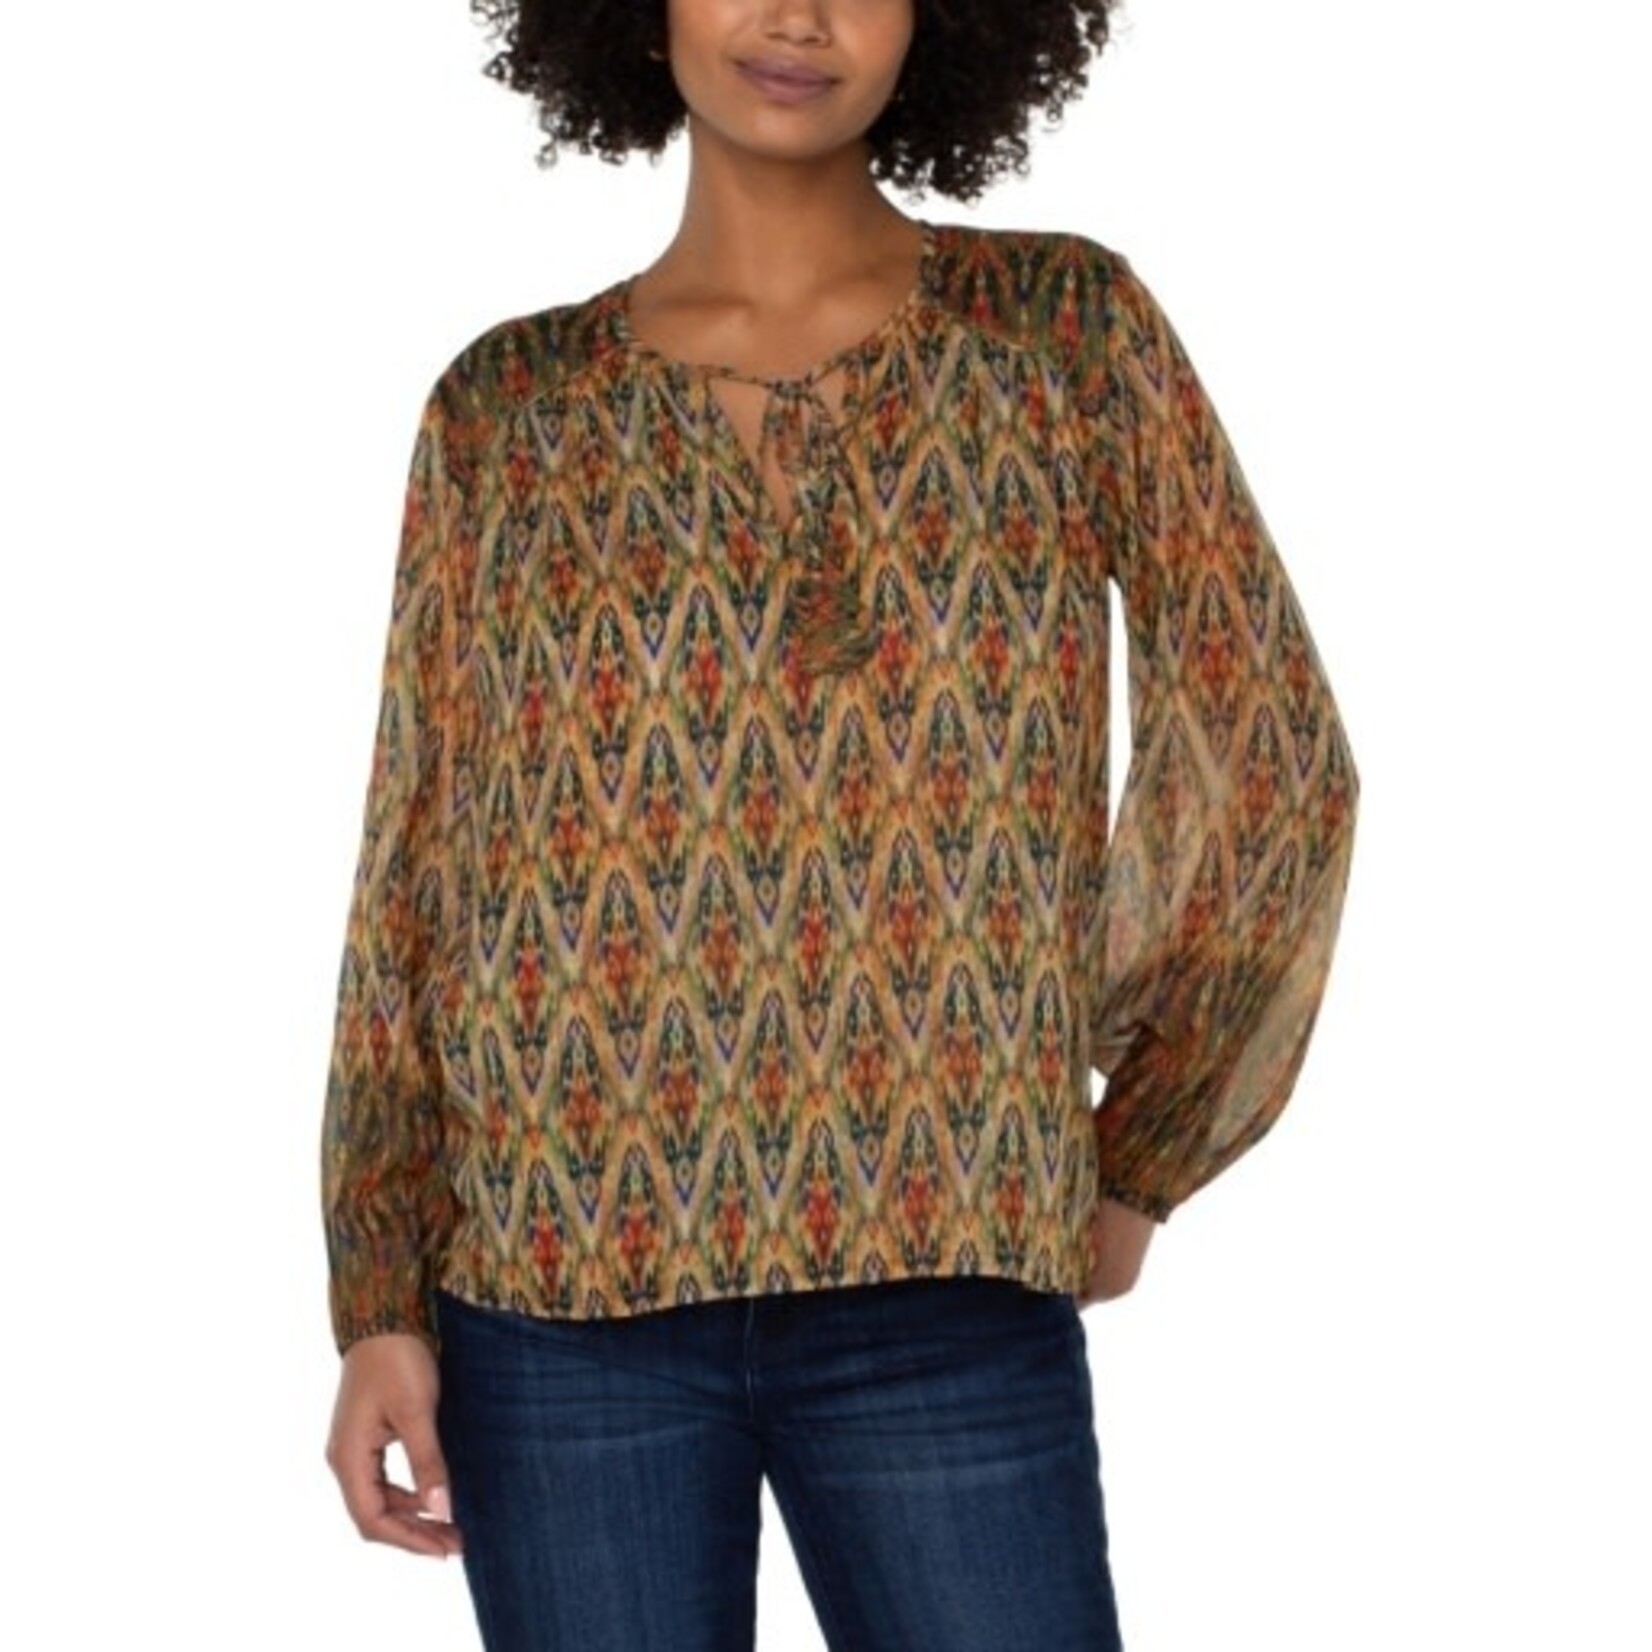 Liverpool Los Angeles Double Layer Woven Blouse